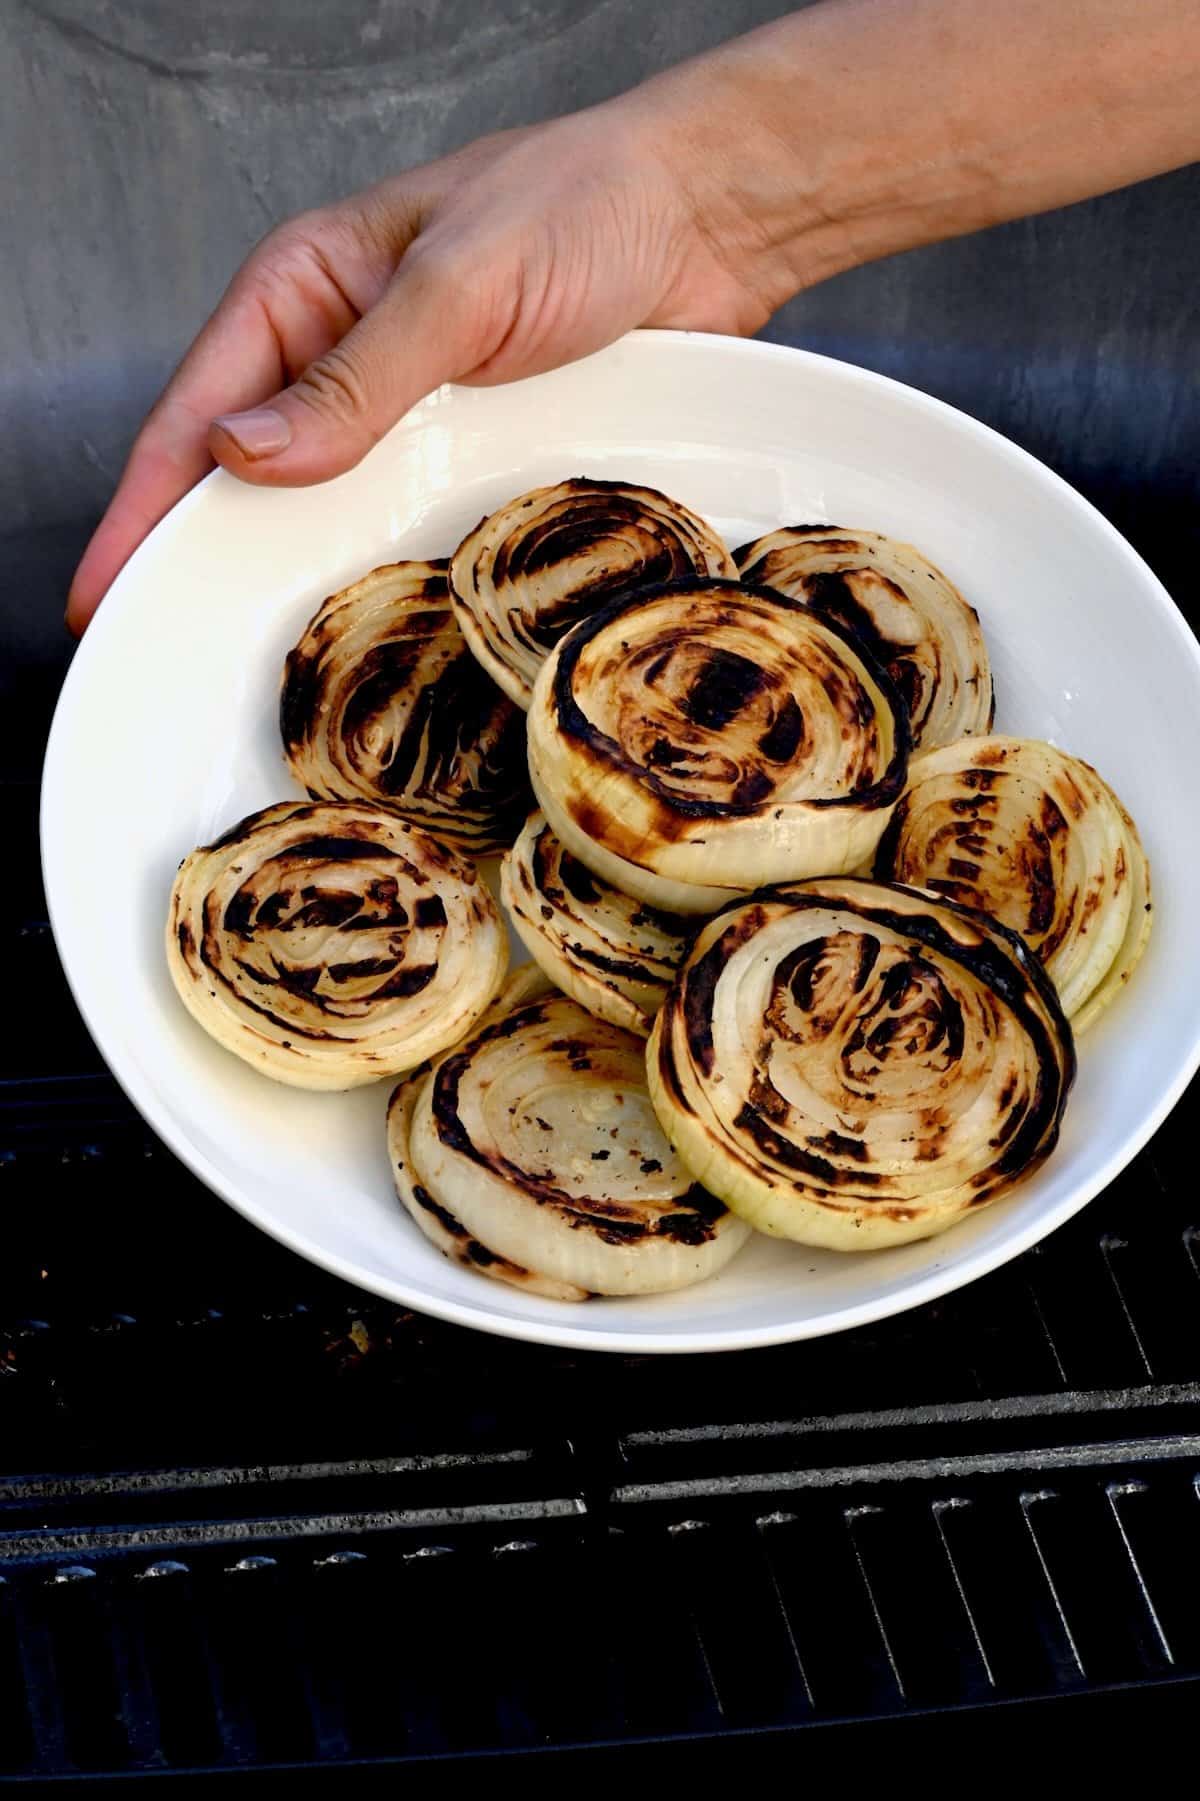 Freshly grilled onions in a plate